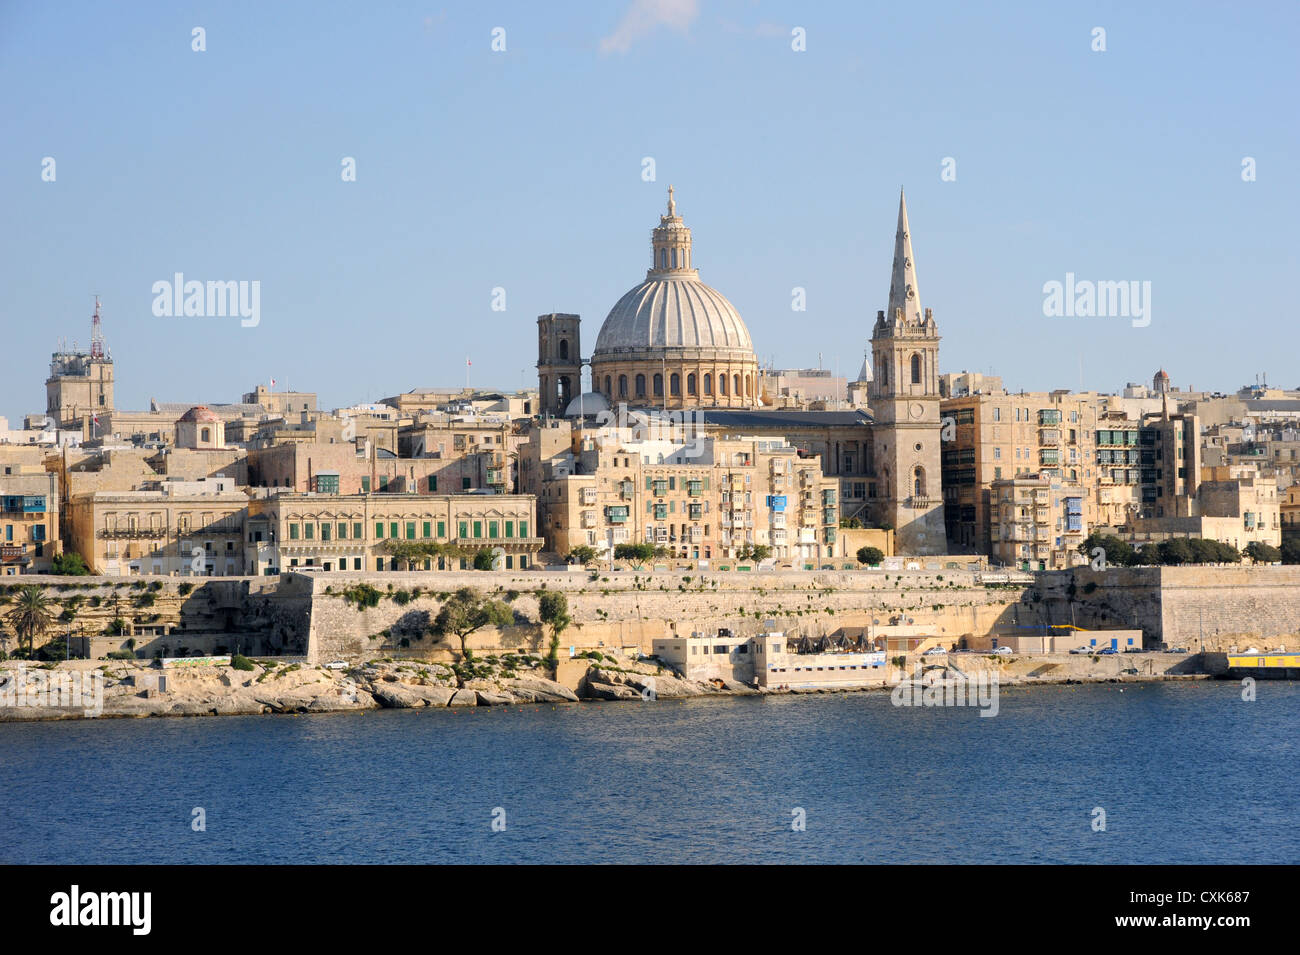 Valetta, Malta. Viewed from Sliema. Dome of St John's Cathedral. Stock Photo